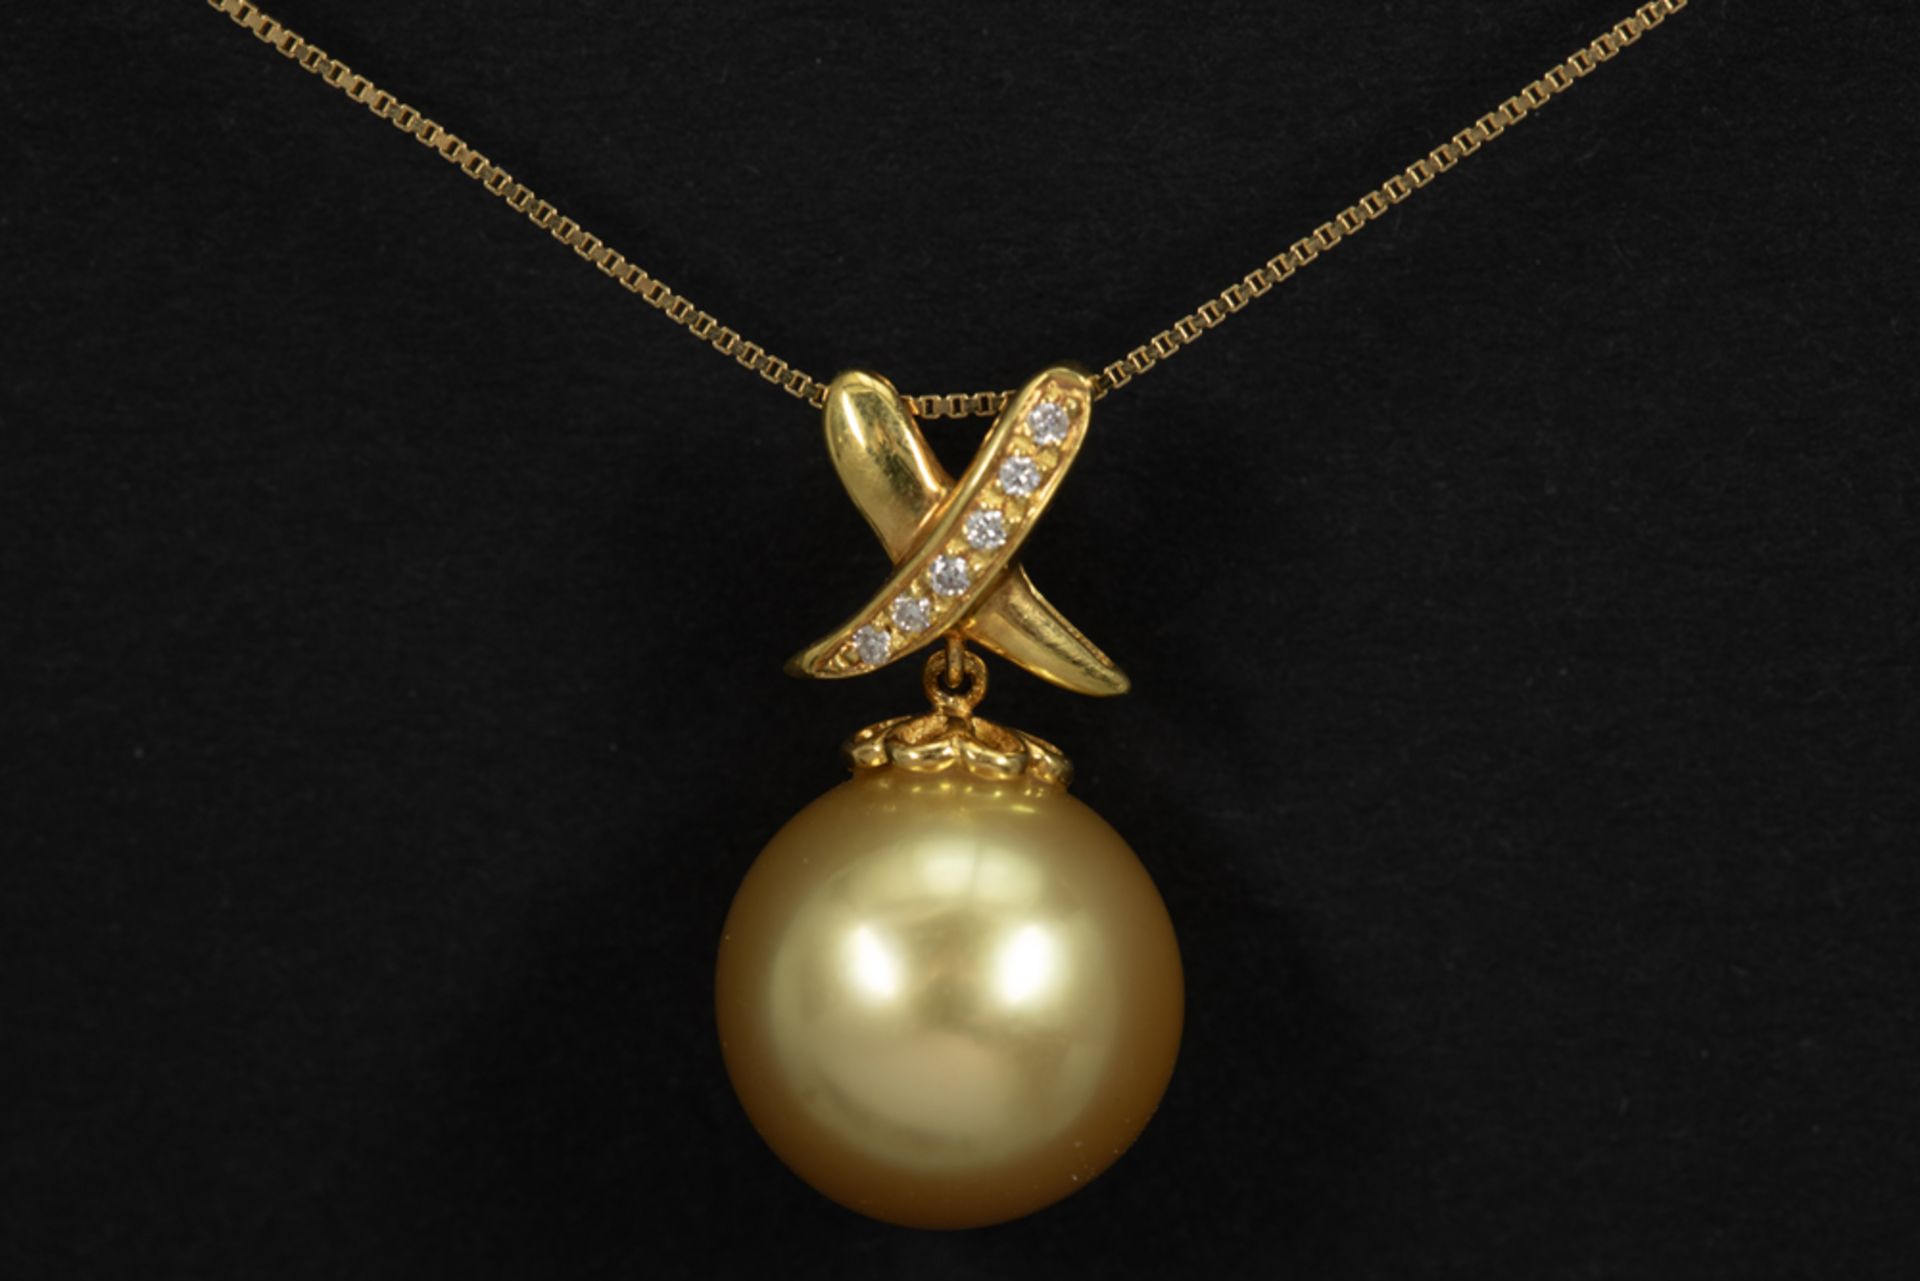 matching "Saria & C° Antwerp" pendant in yellow gold (18 carat) with a typical "Saria South Sea